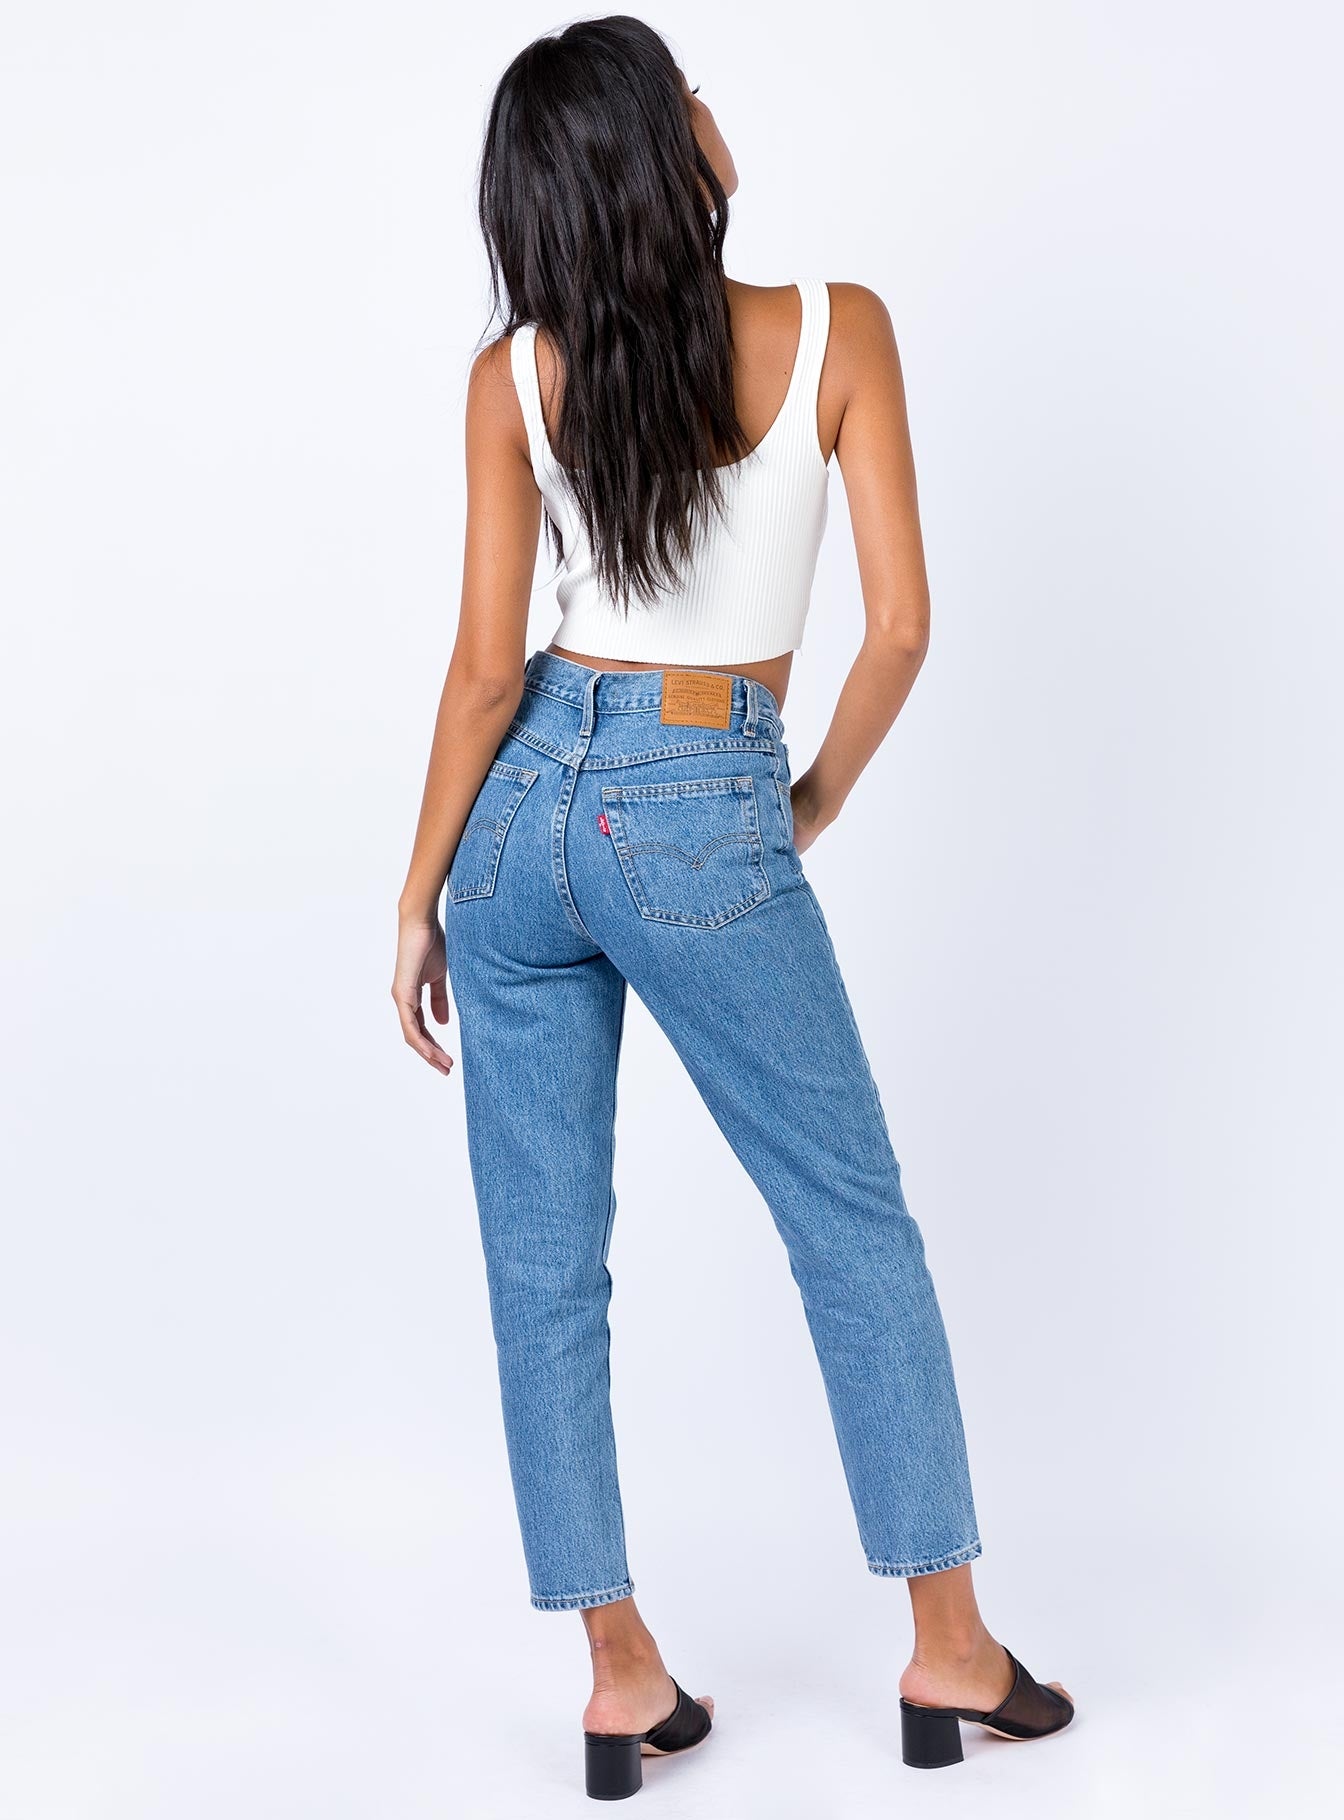 Levis Beverly Hills Mom Jeans